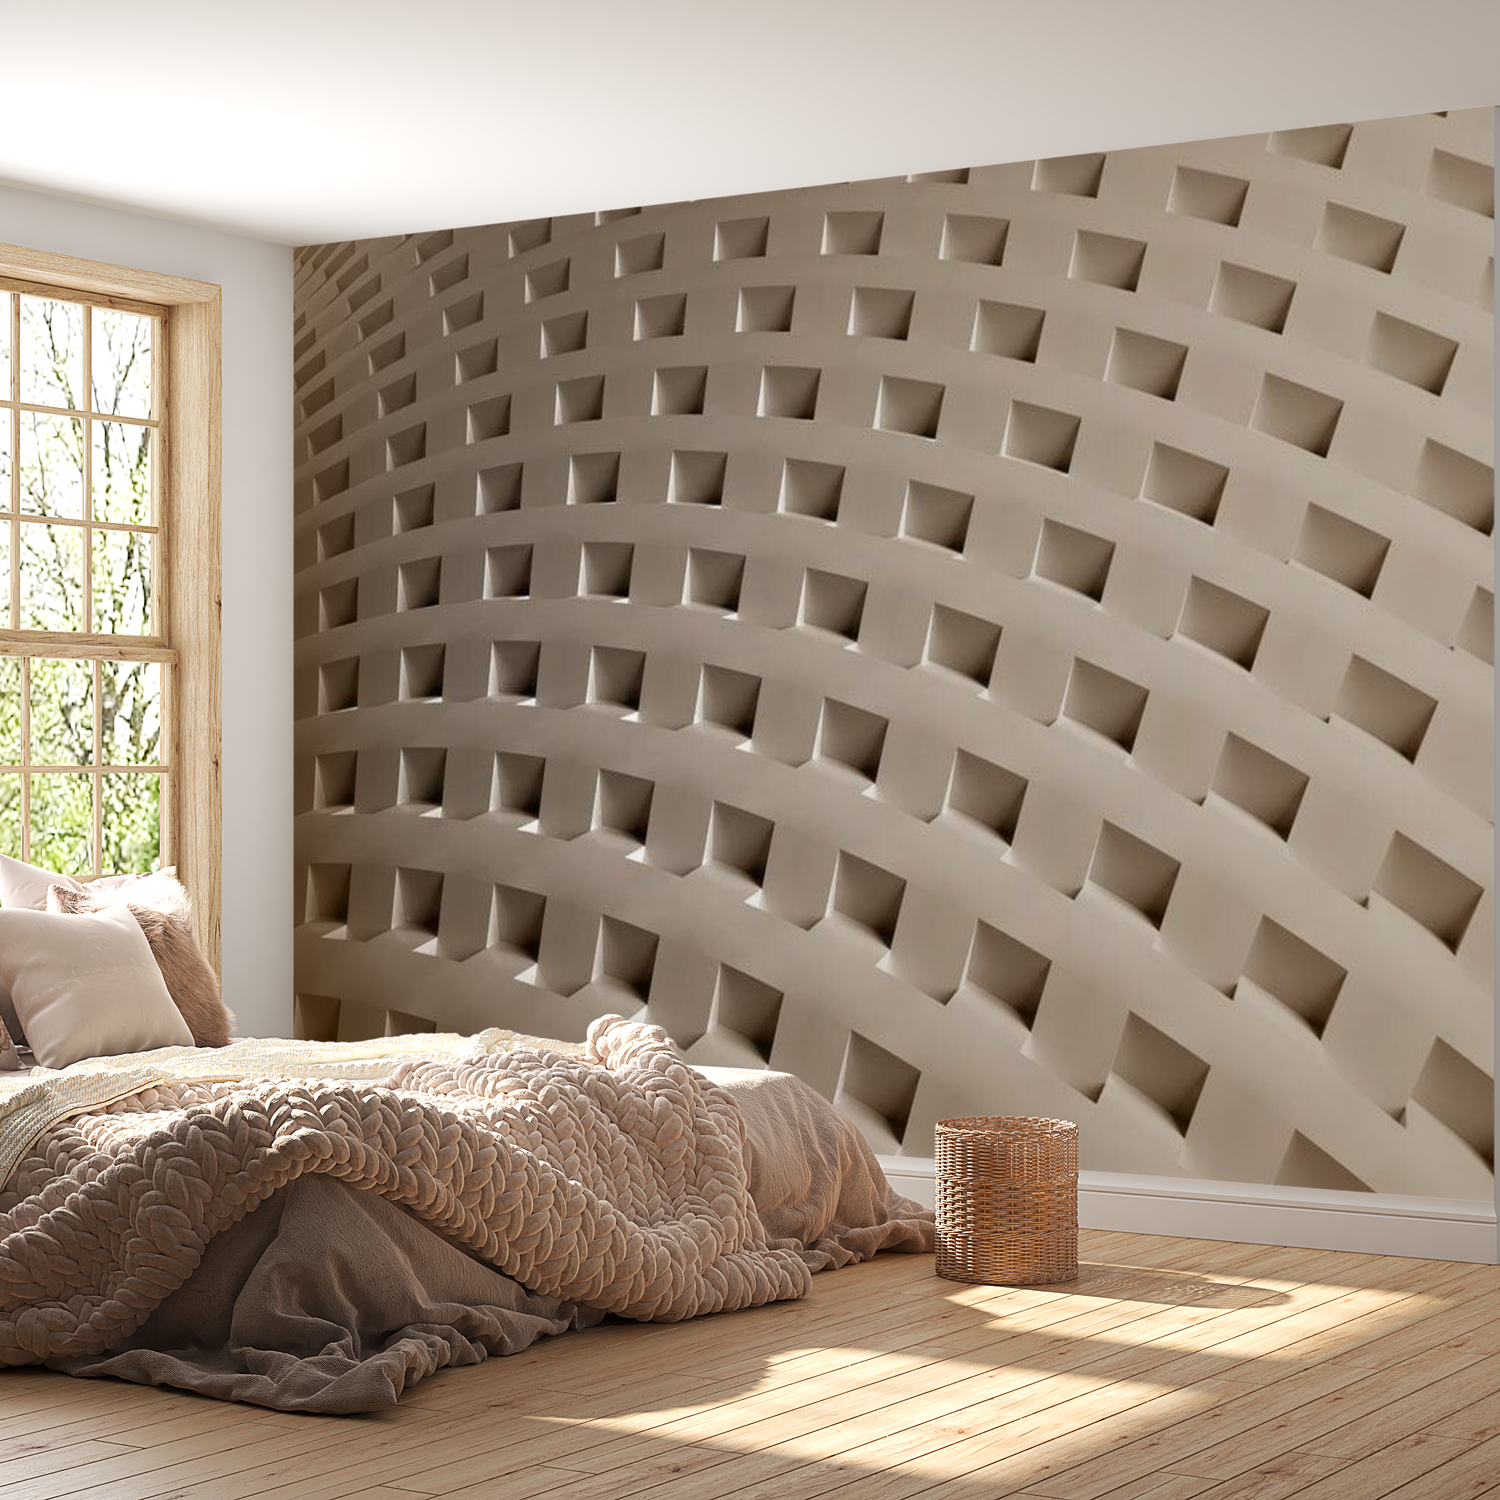 3D Illusion Wallpaper Wall Mural - The Construction Of Modernity 39"Wx27"H